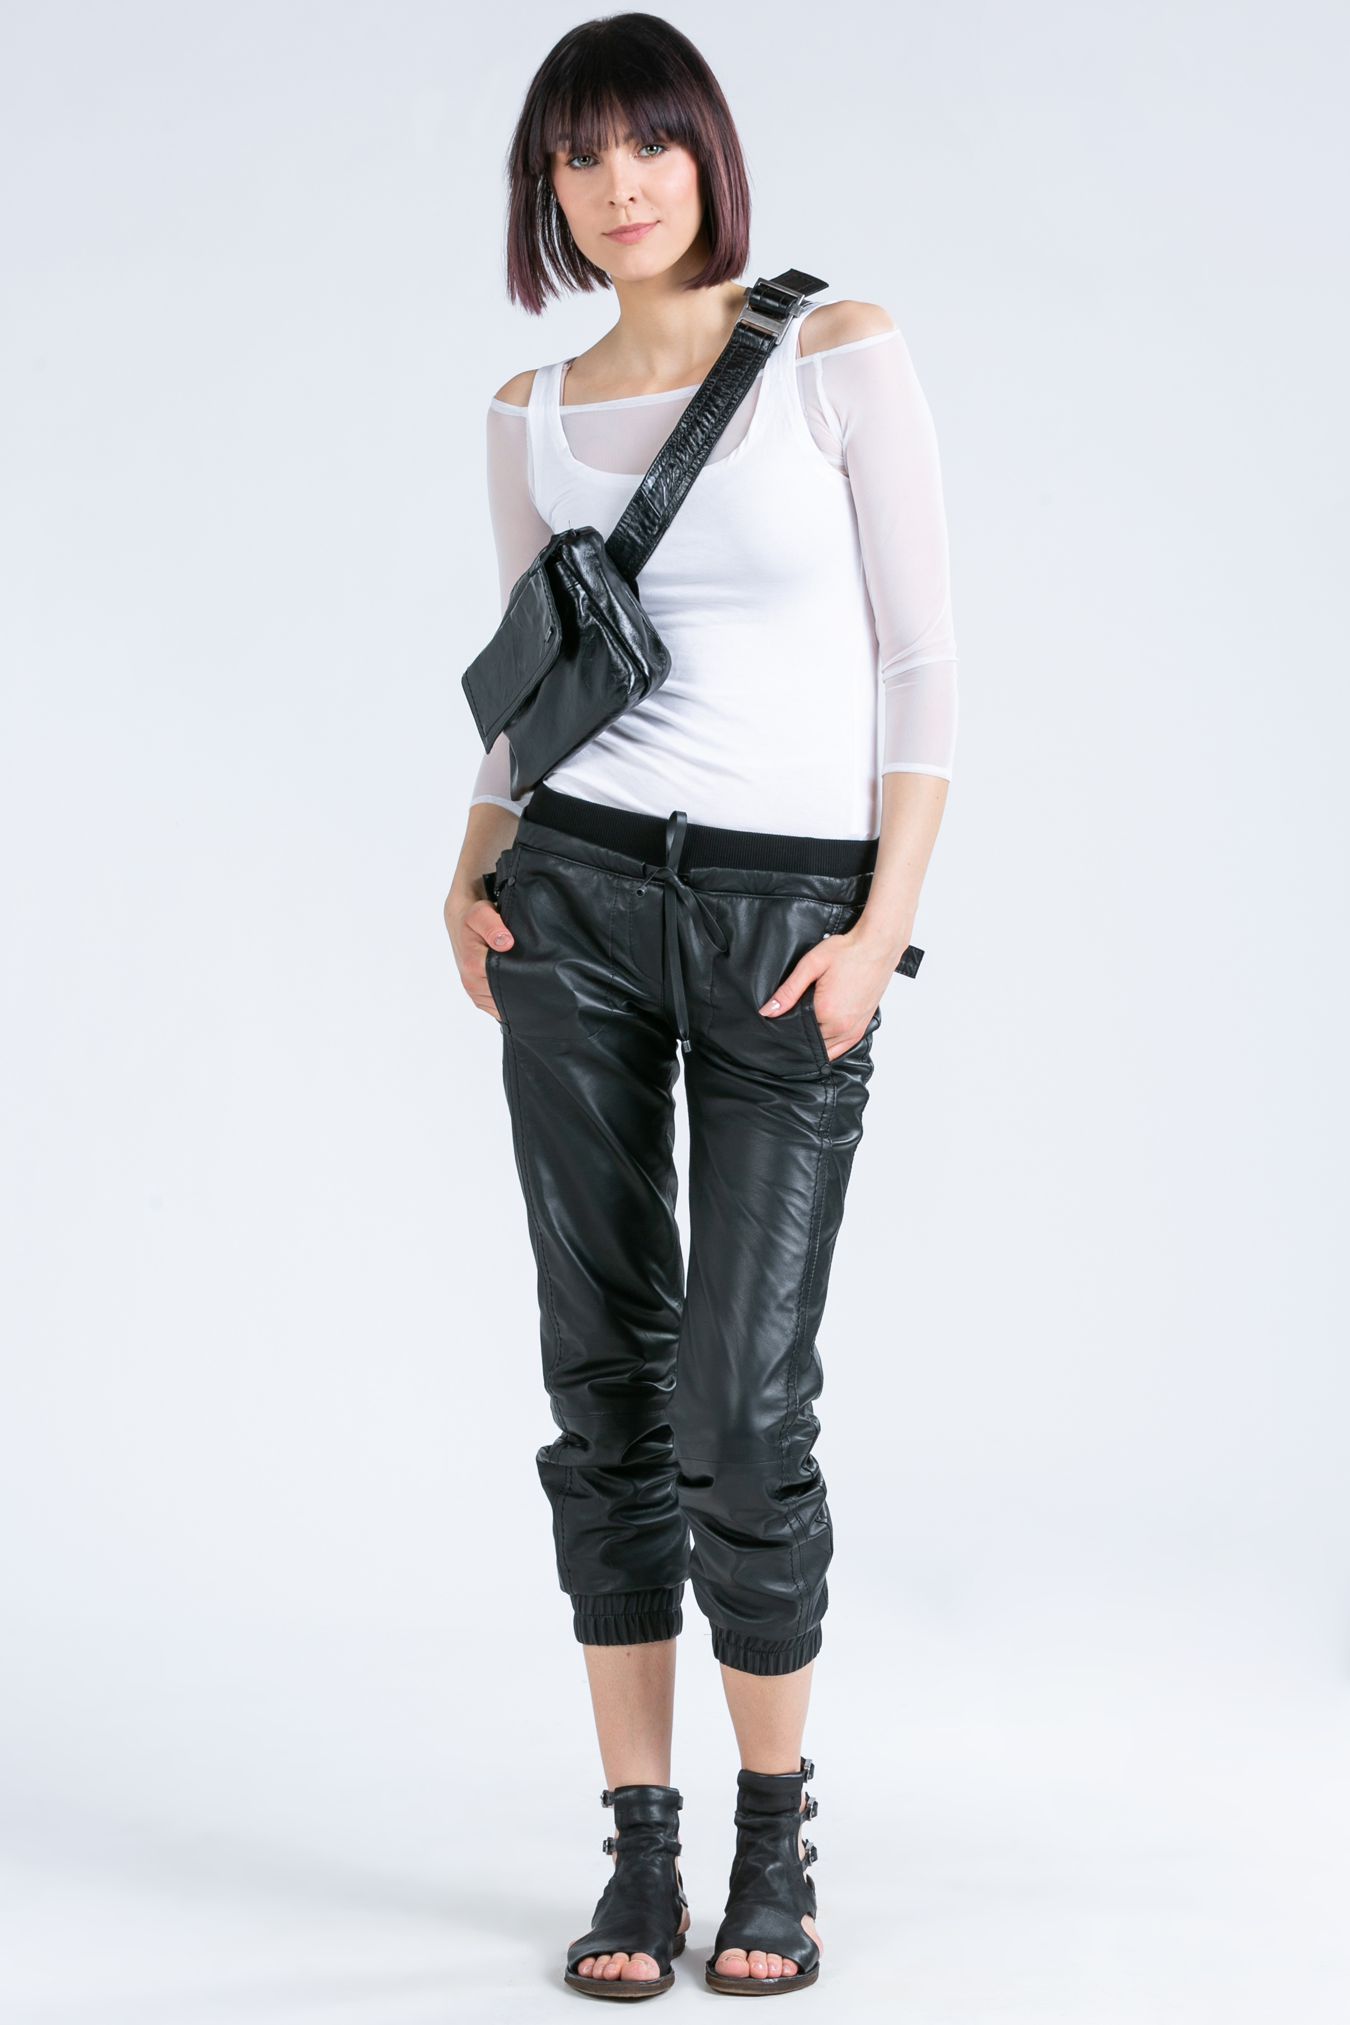 120015 LEATHER PANTS WITH STRAPS BLACK - By Rieske image 4